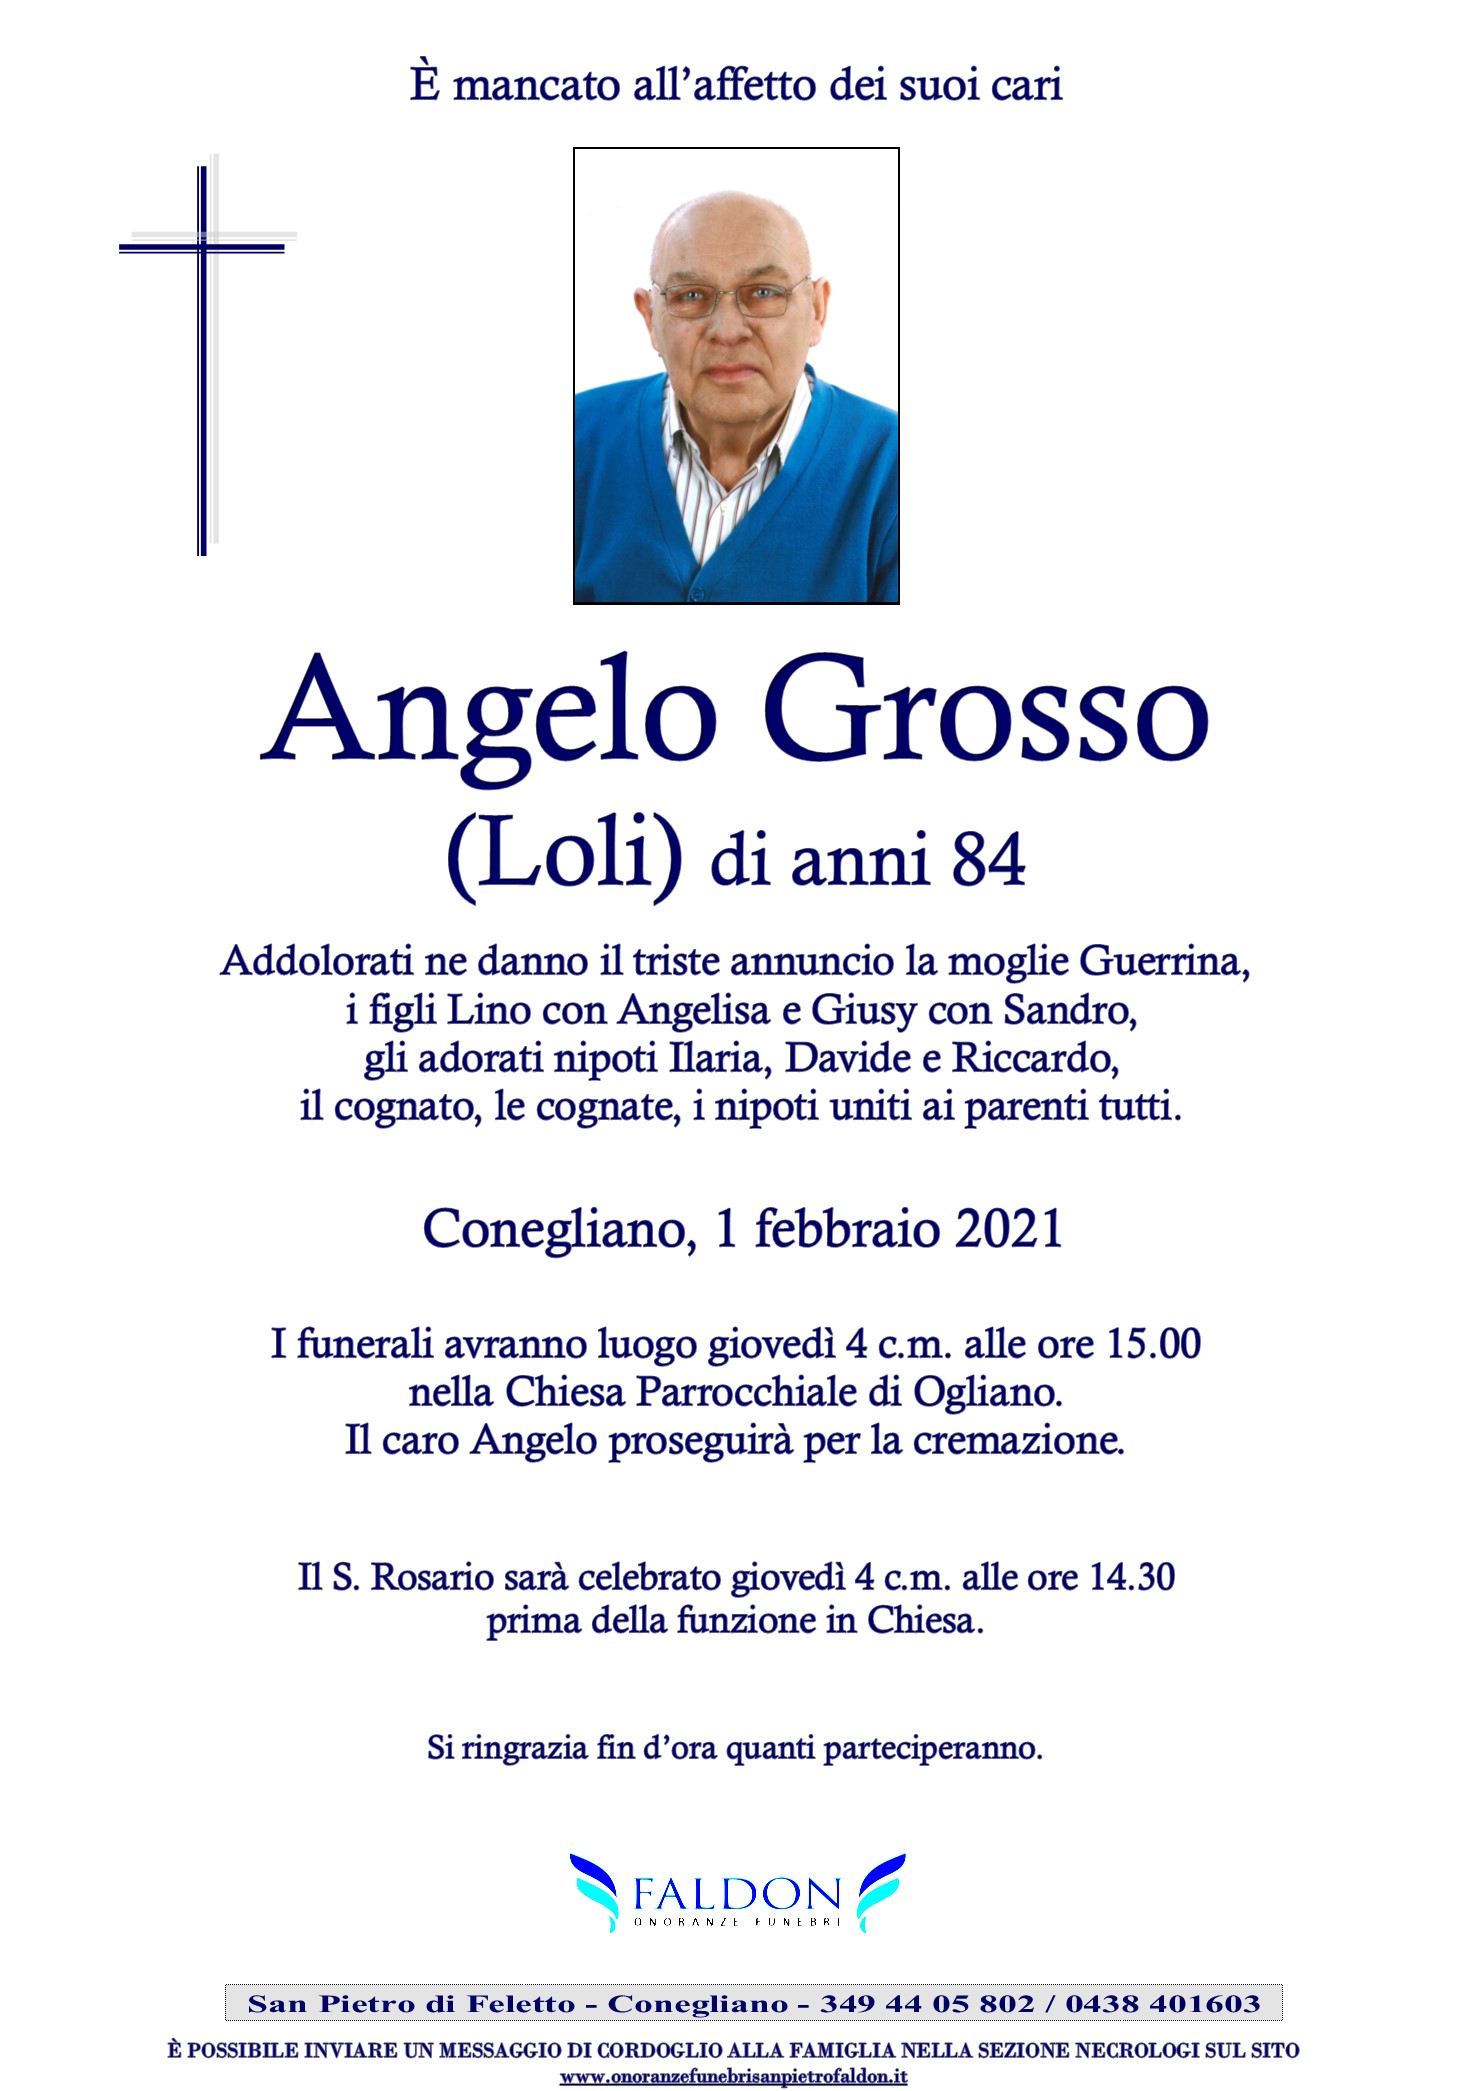 Angelo Grosso